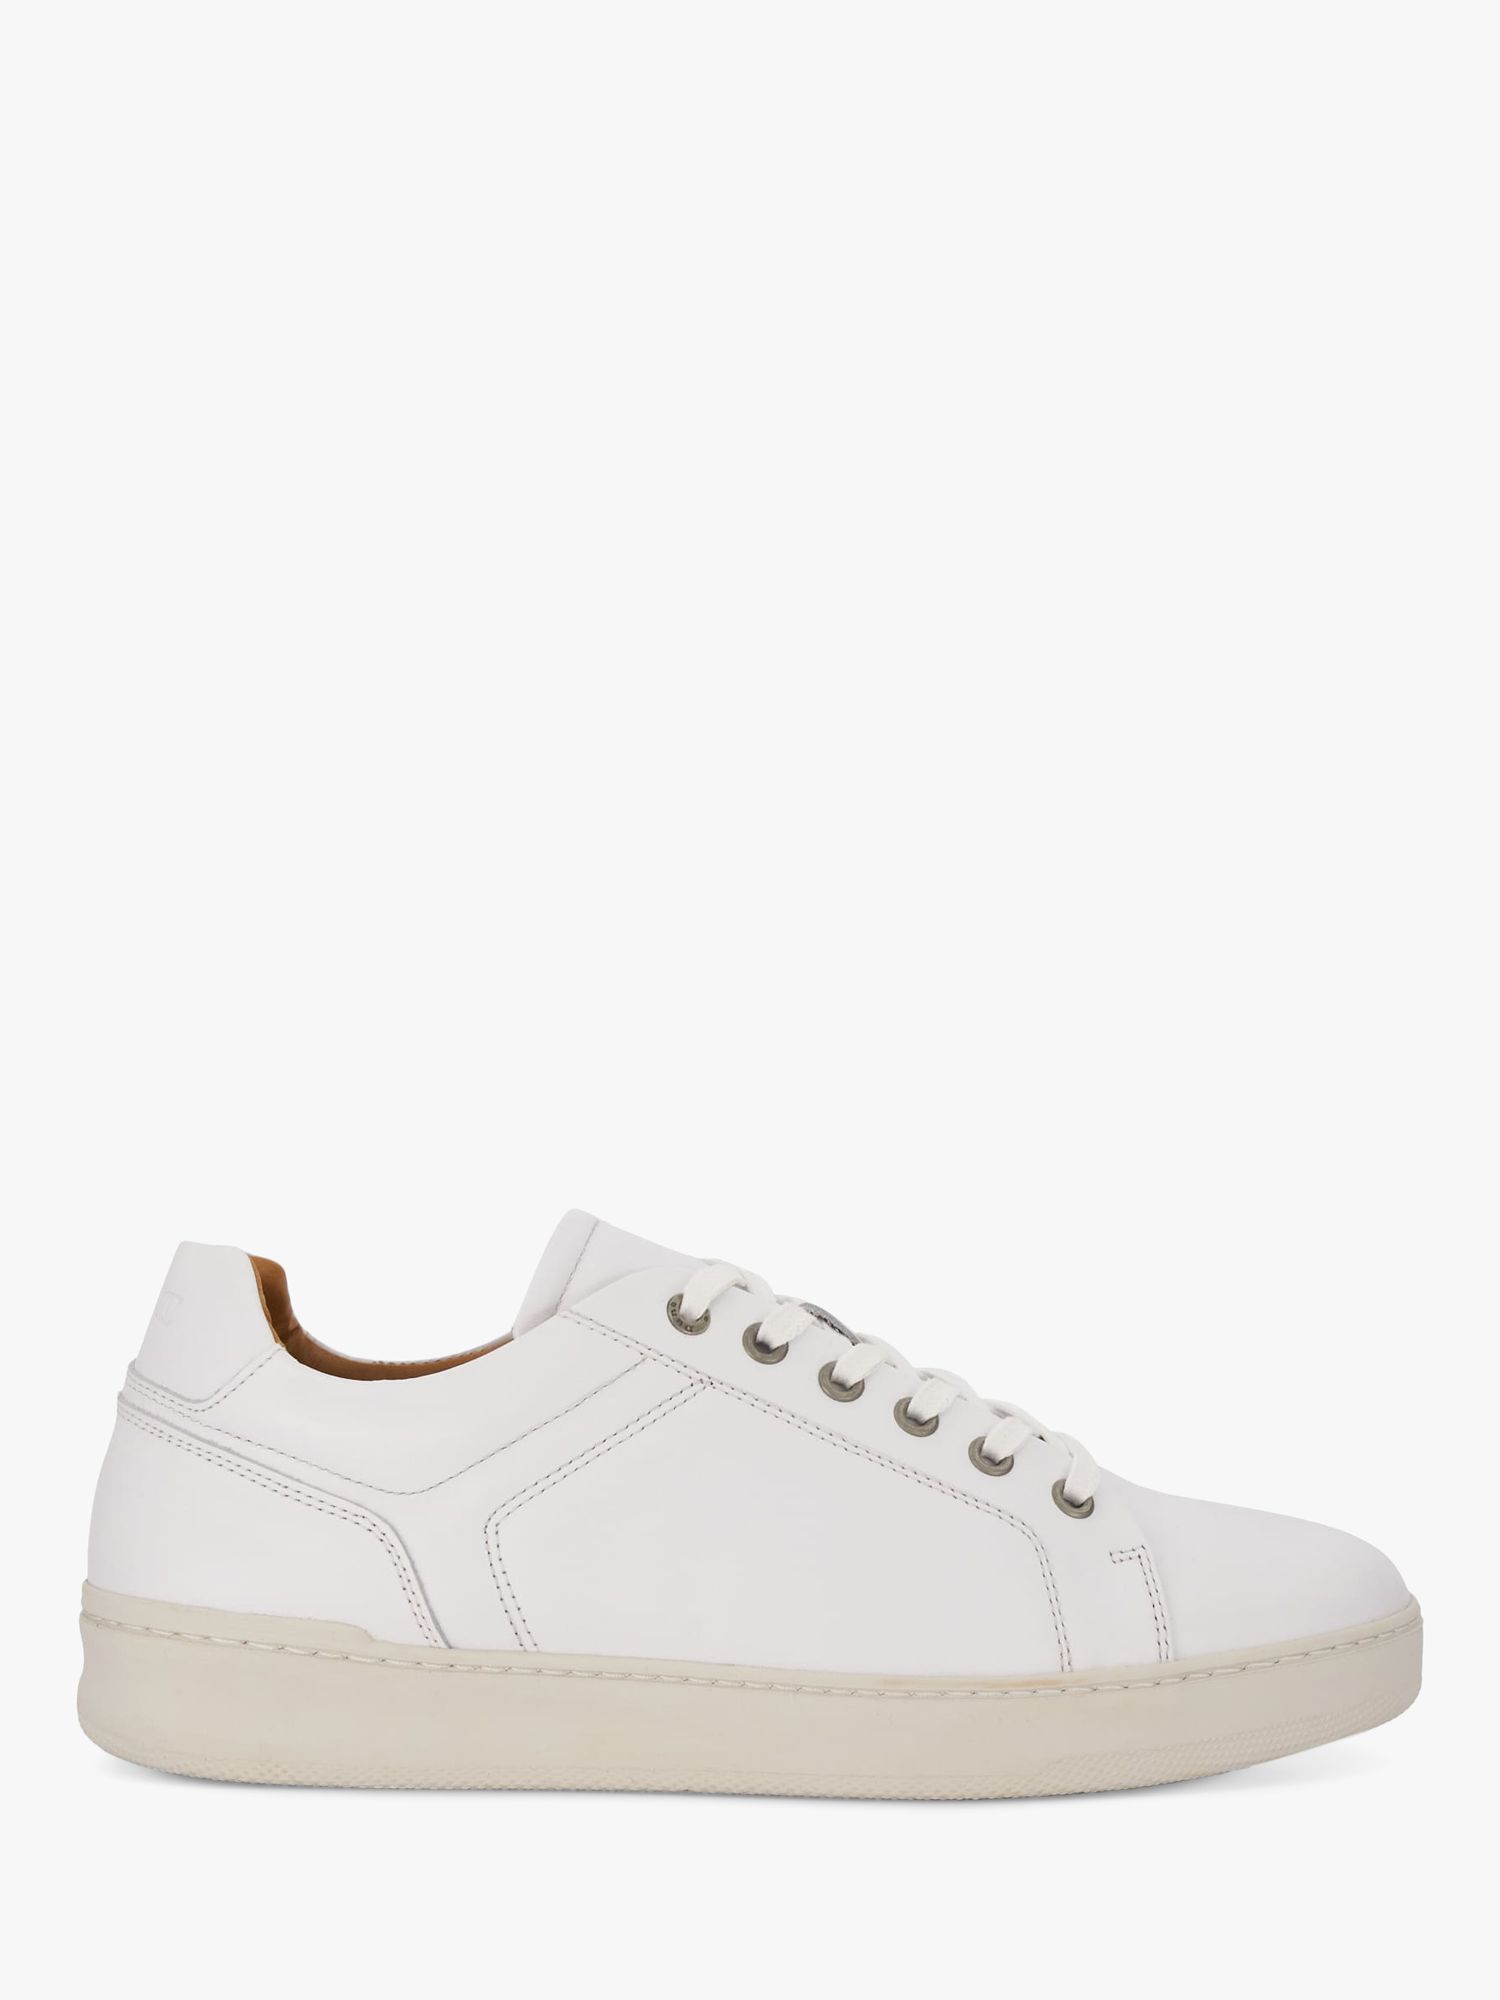 Dune Toledo Low Top Leather Trainers, White at John Lewis & Partners